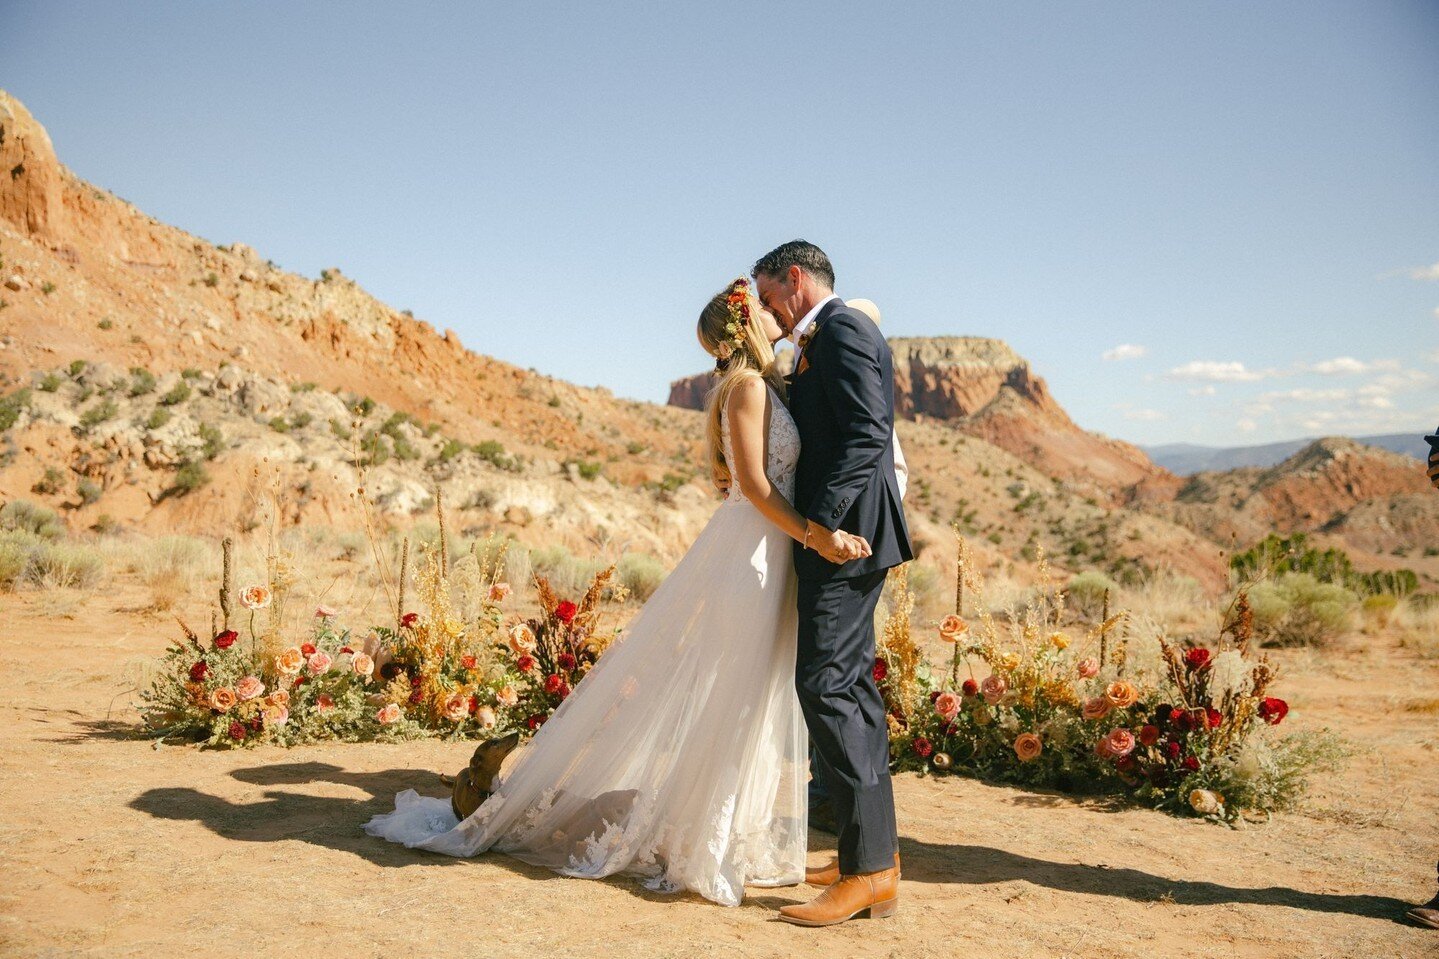 A love story as epic as the views at Ghost Ranch &middot;

Photo: @RileyRussil
Design + Florals: @Floriography_Flowers
Planning: @orangeseptember
Catering: @Walterburkecatering
Rentals: @copartyrentals

&middot;
&middot;

#santafewedding #santafeflor